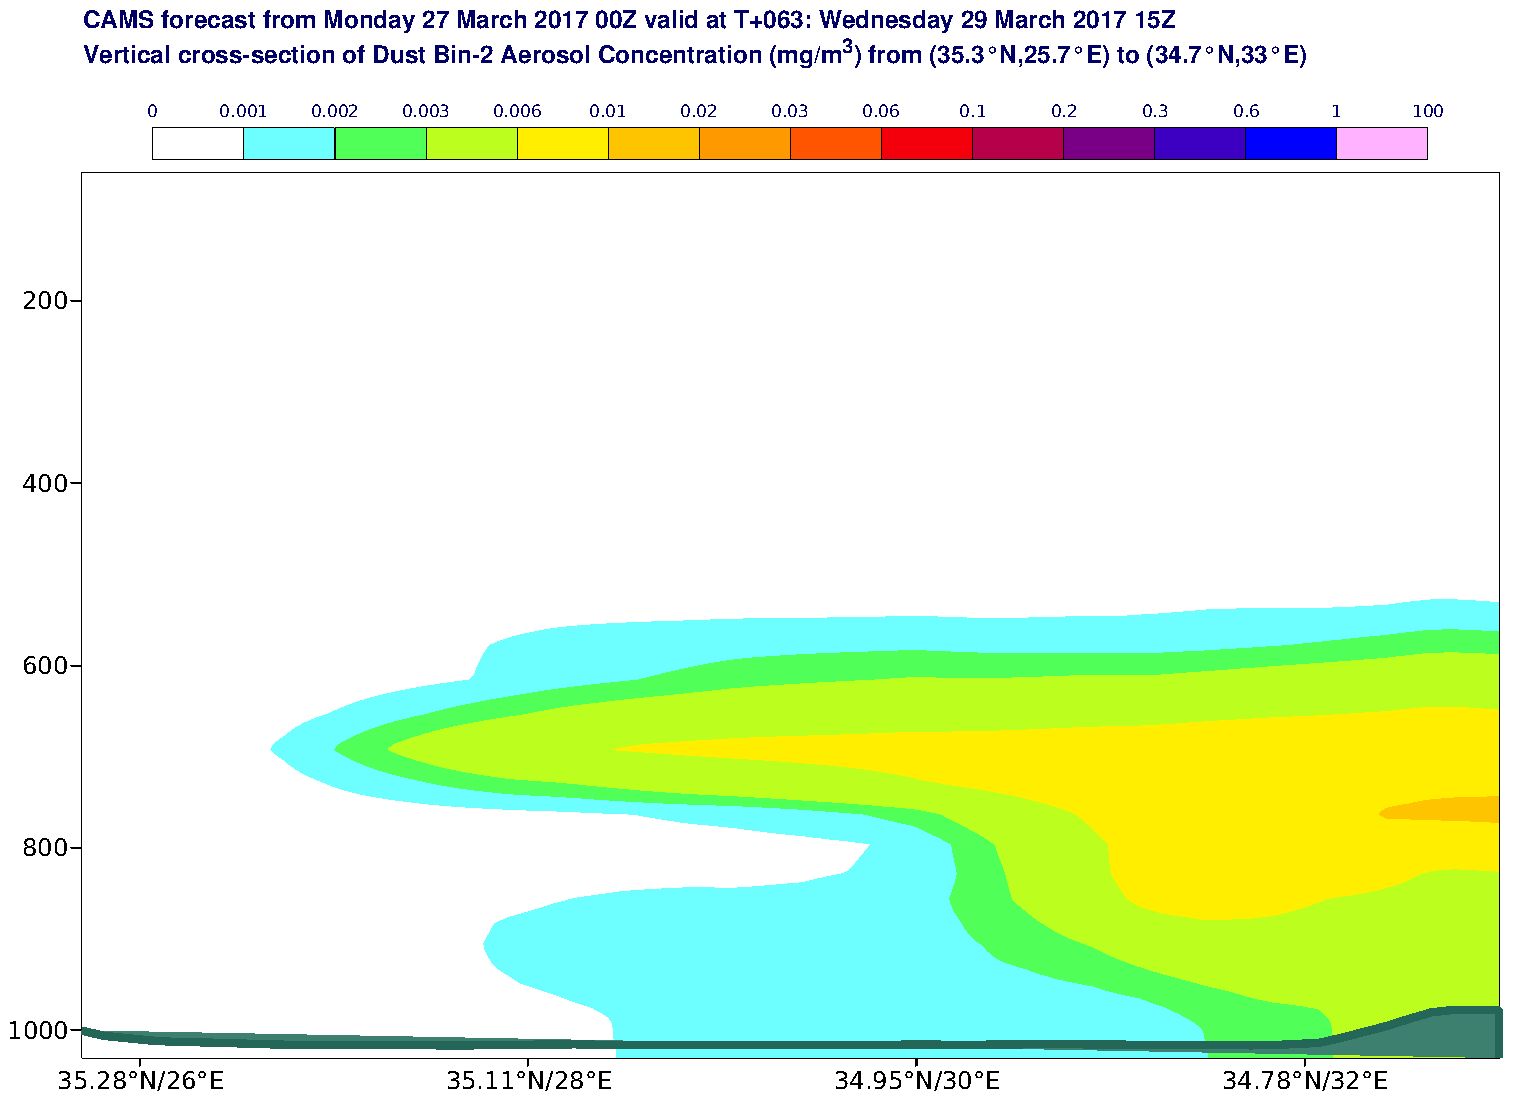 Vertical cross-section of Dust Bin-2 Aerosol Concentration (mg/m3) valid at T63 - 2017-03-29 15:00